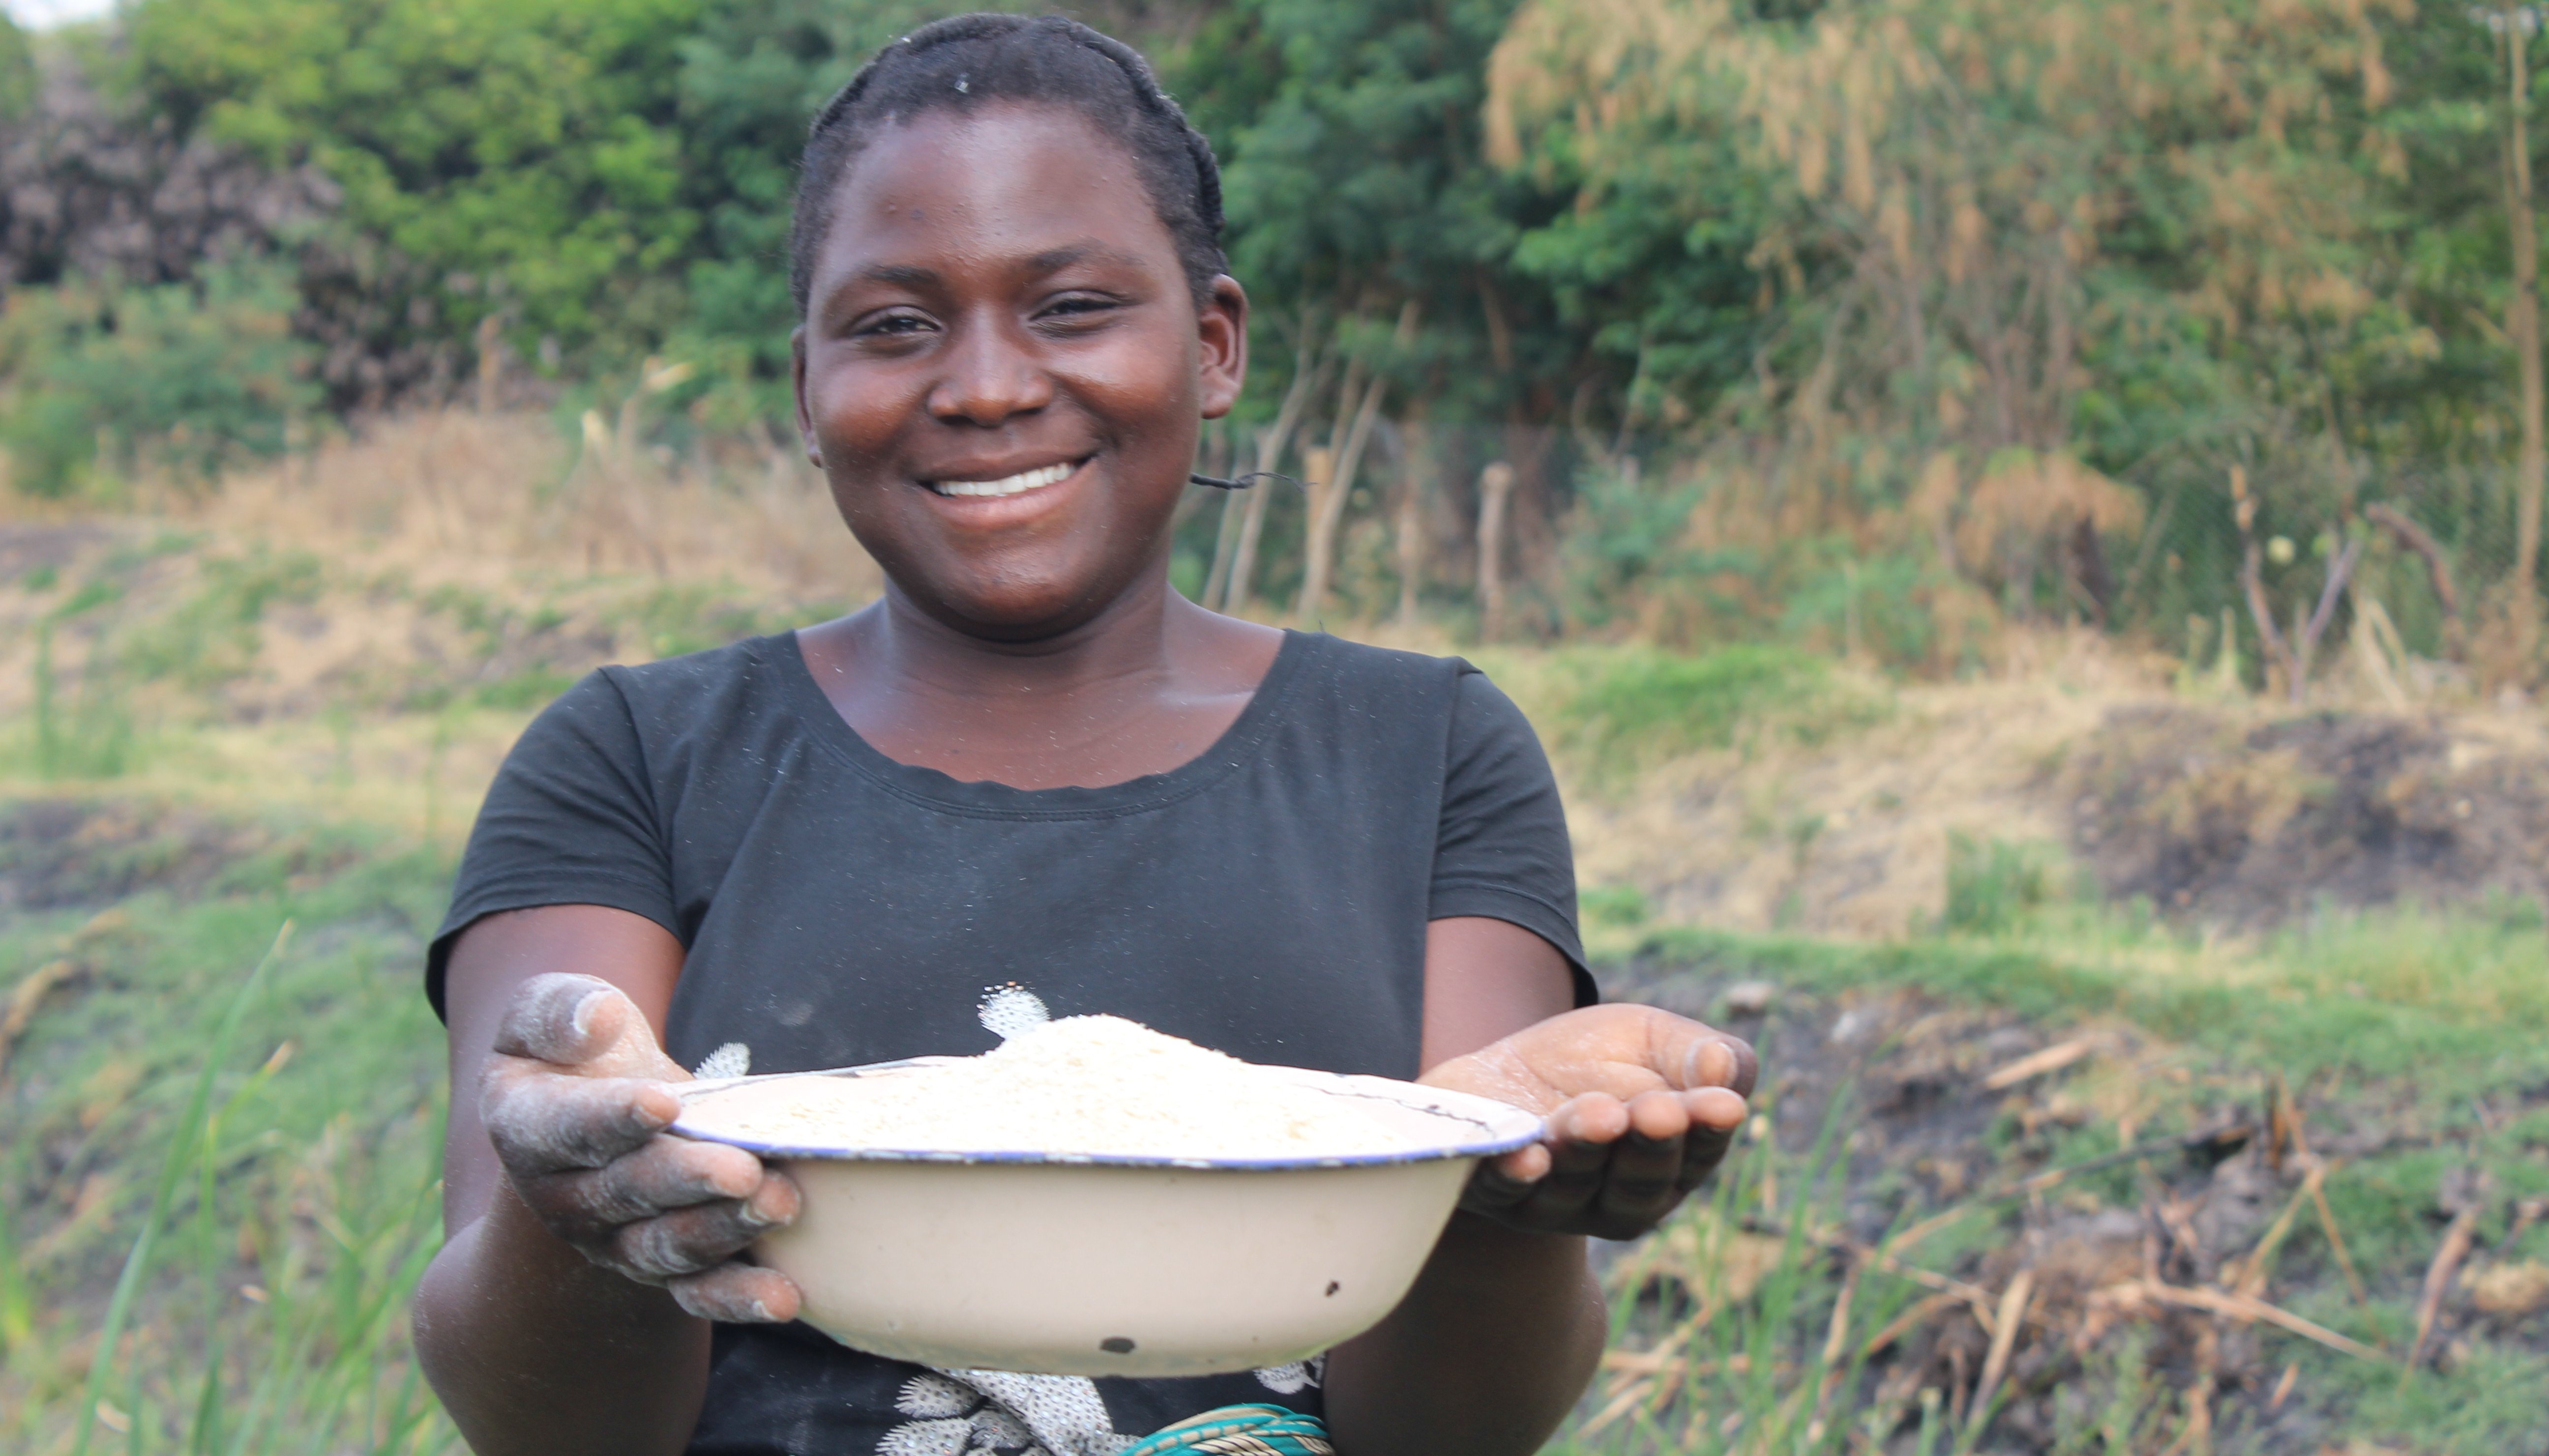 Read Community Transformation through Sustainable Agriculture and Fish Farming by UNDP Zambia